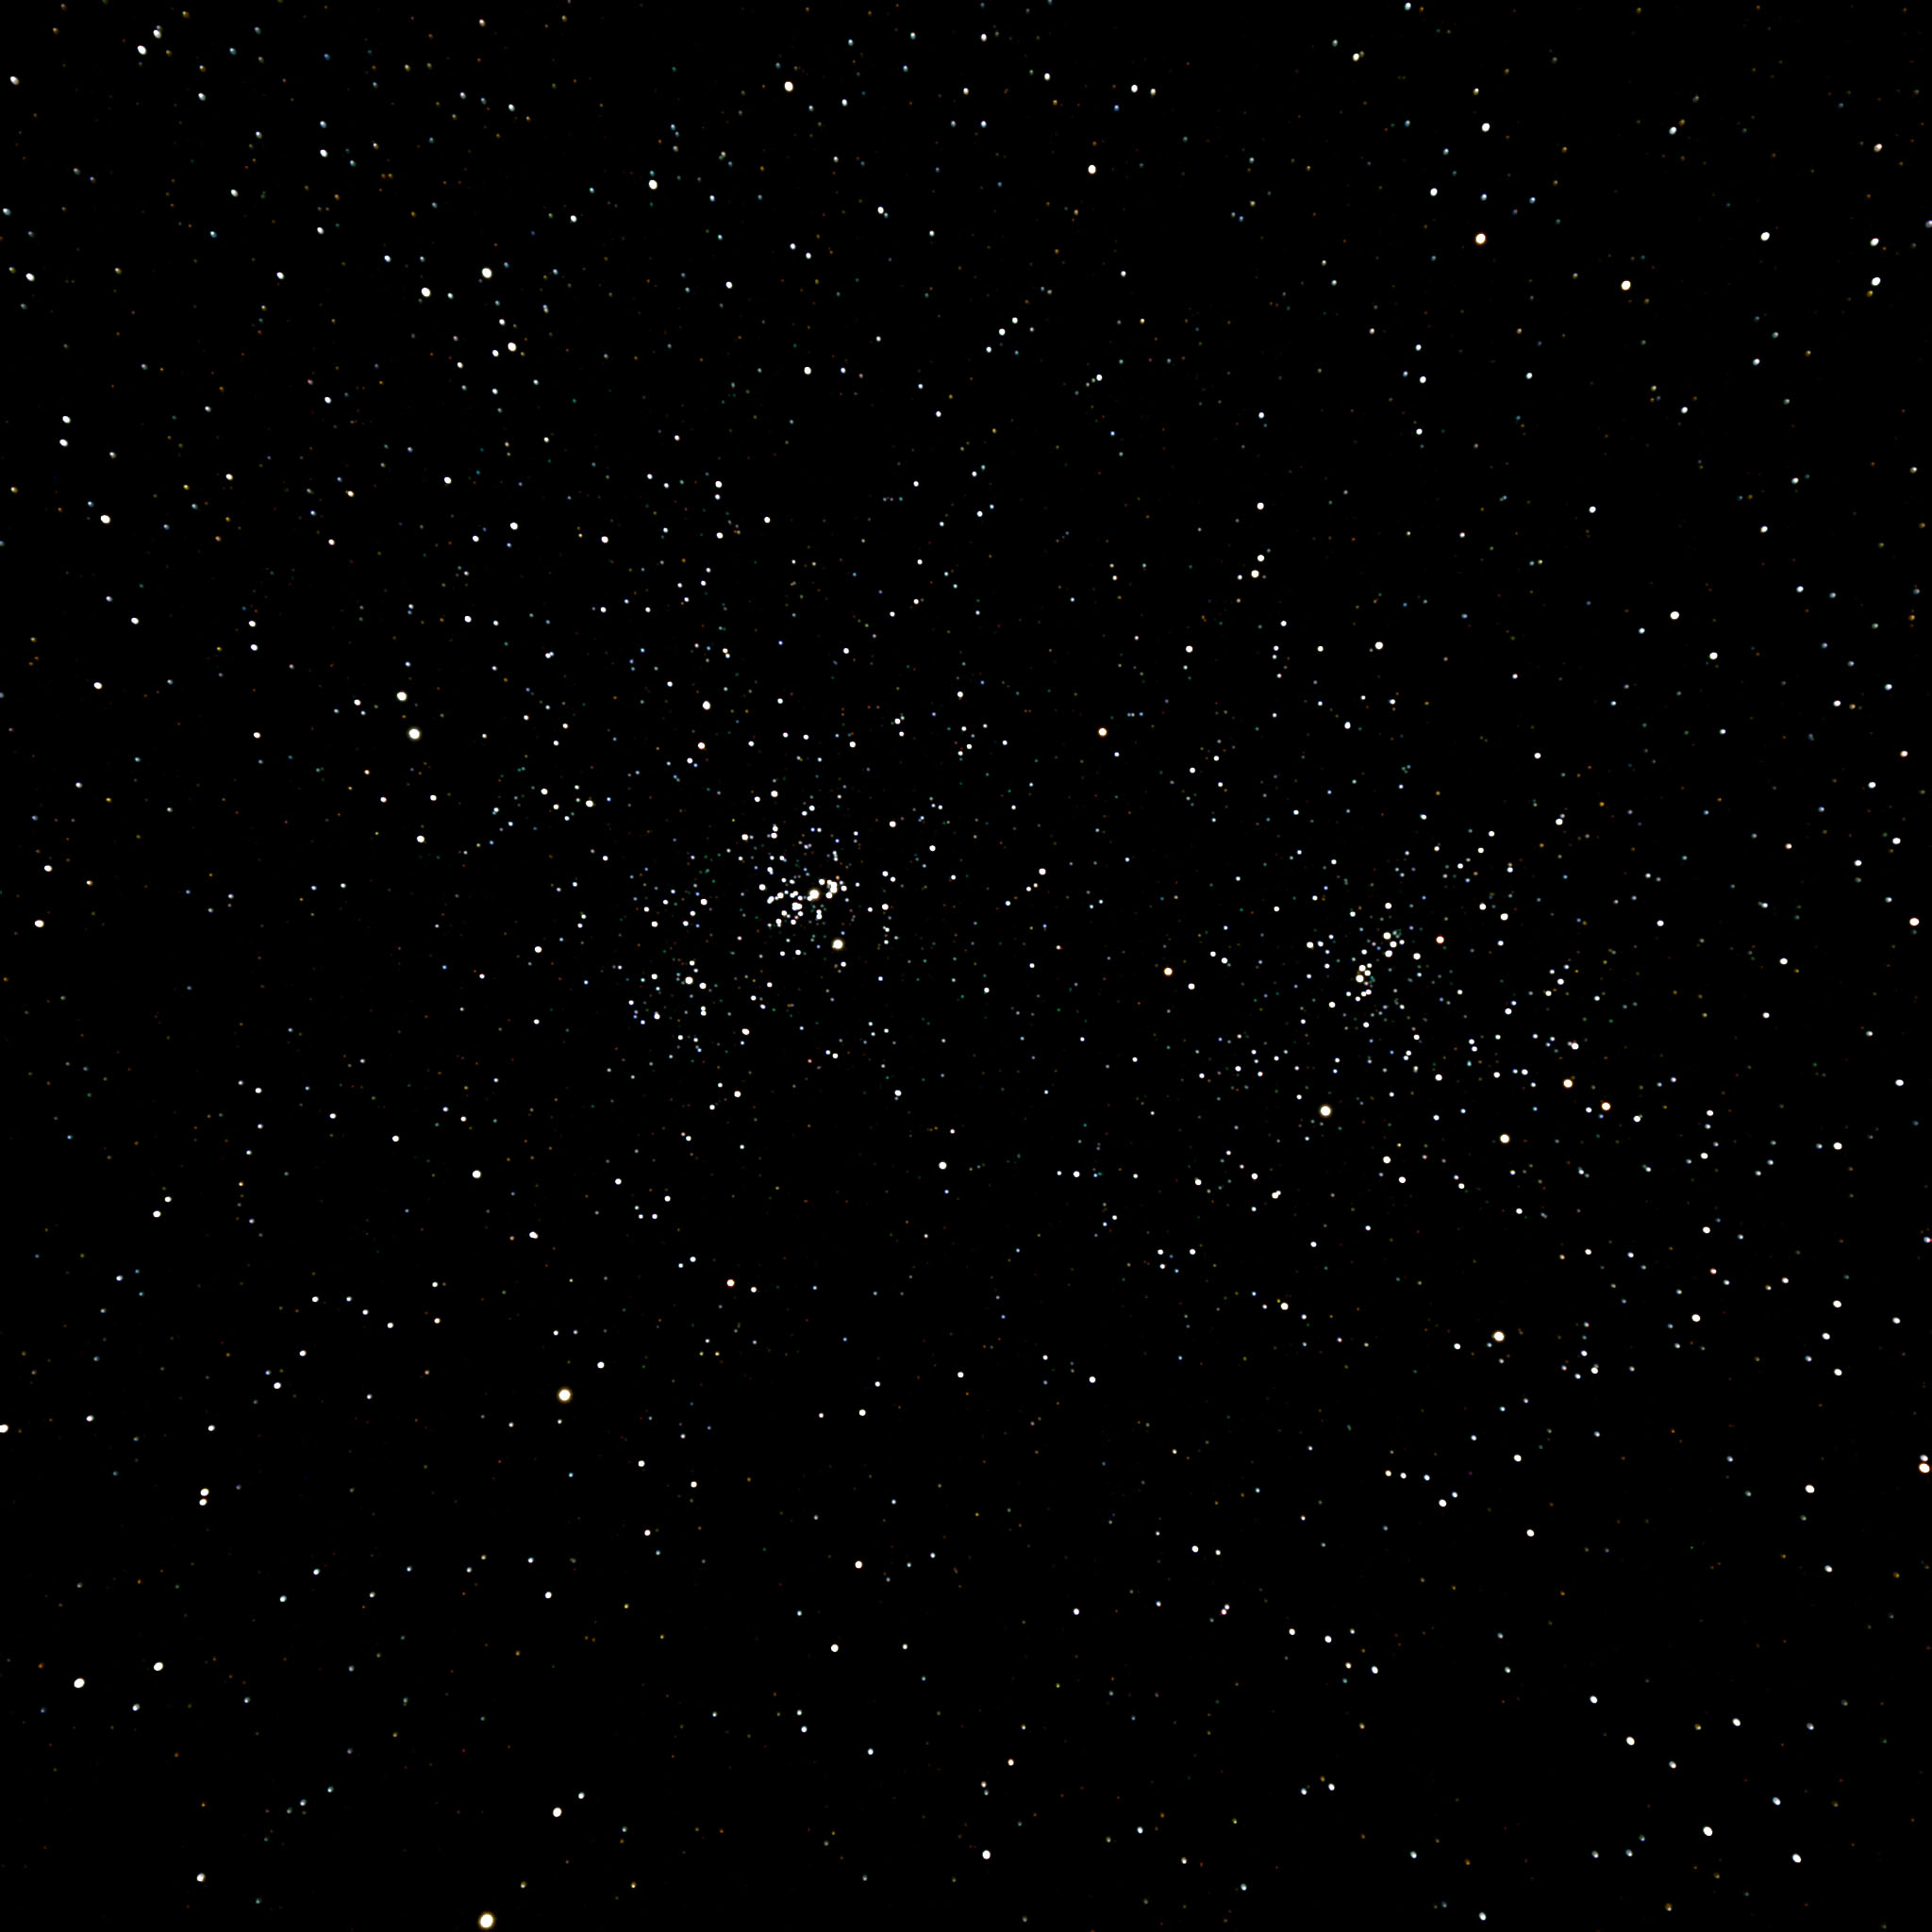 Dark Sky With Stars Wallpaper Image Pictures Becuo